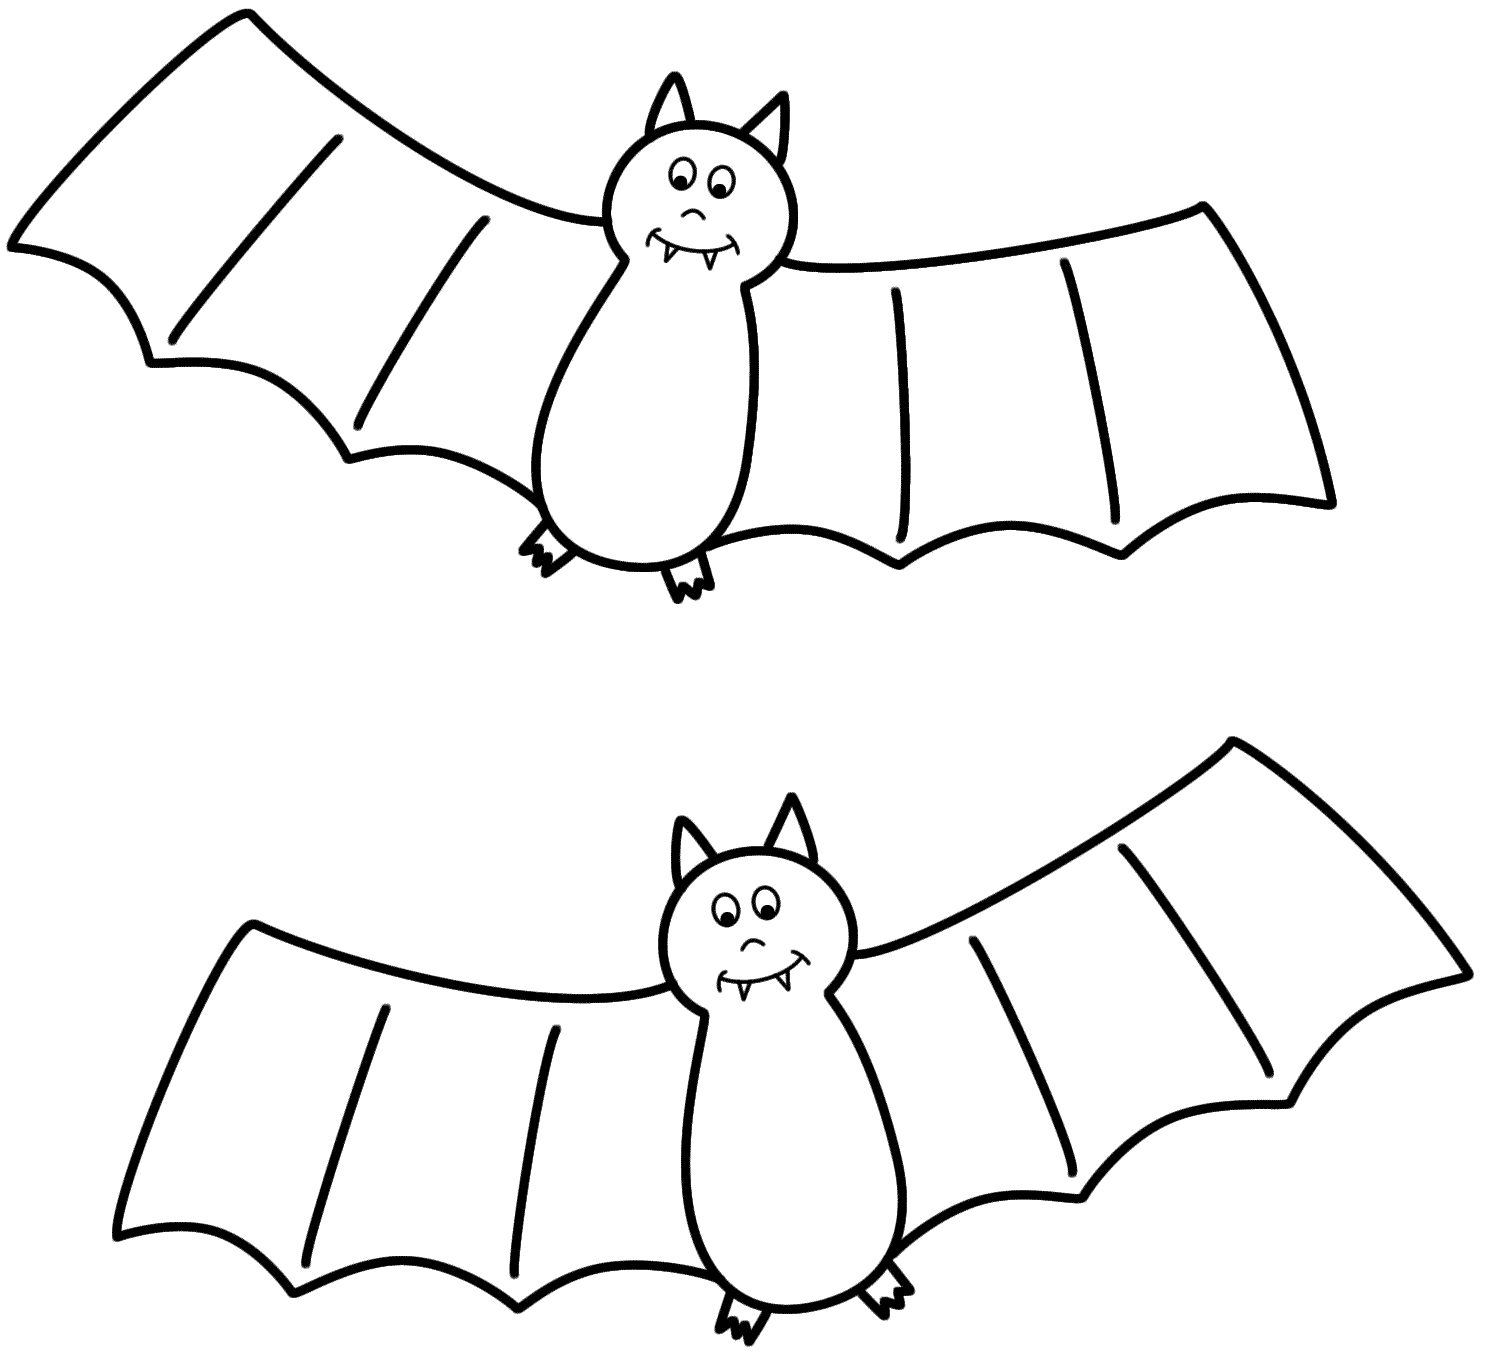 get-this-bat-coloring-pages-free-printable-41552